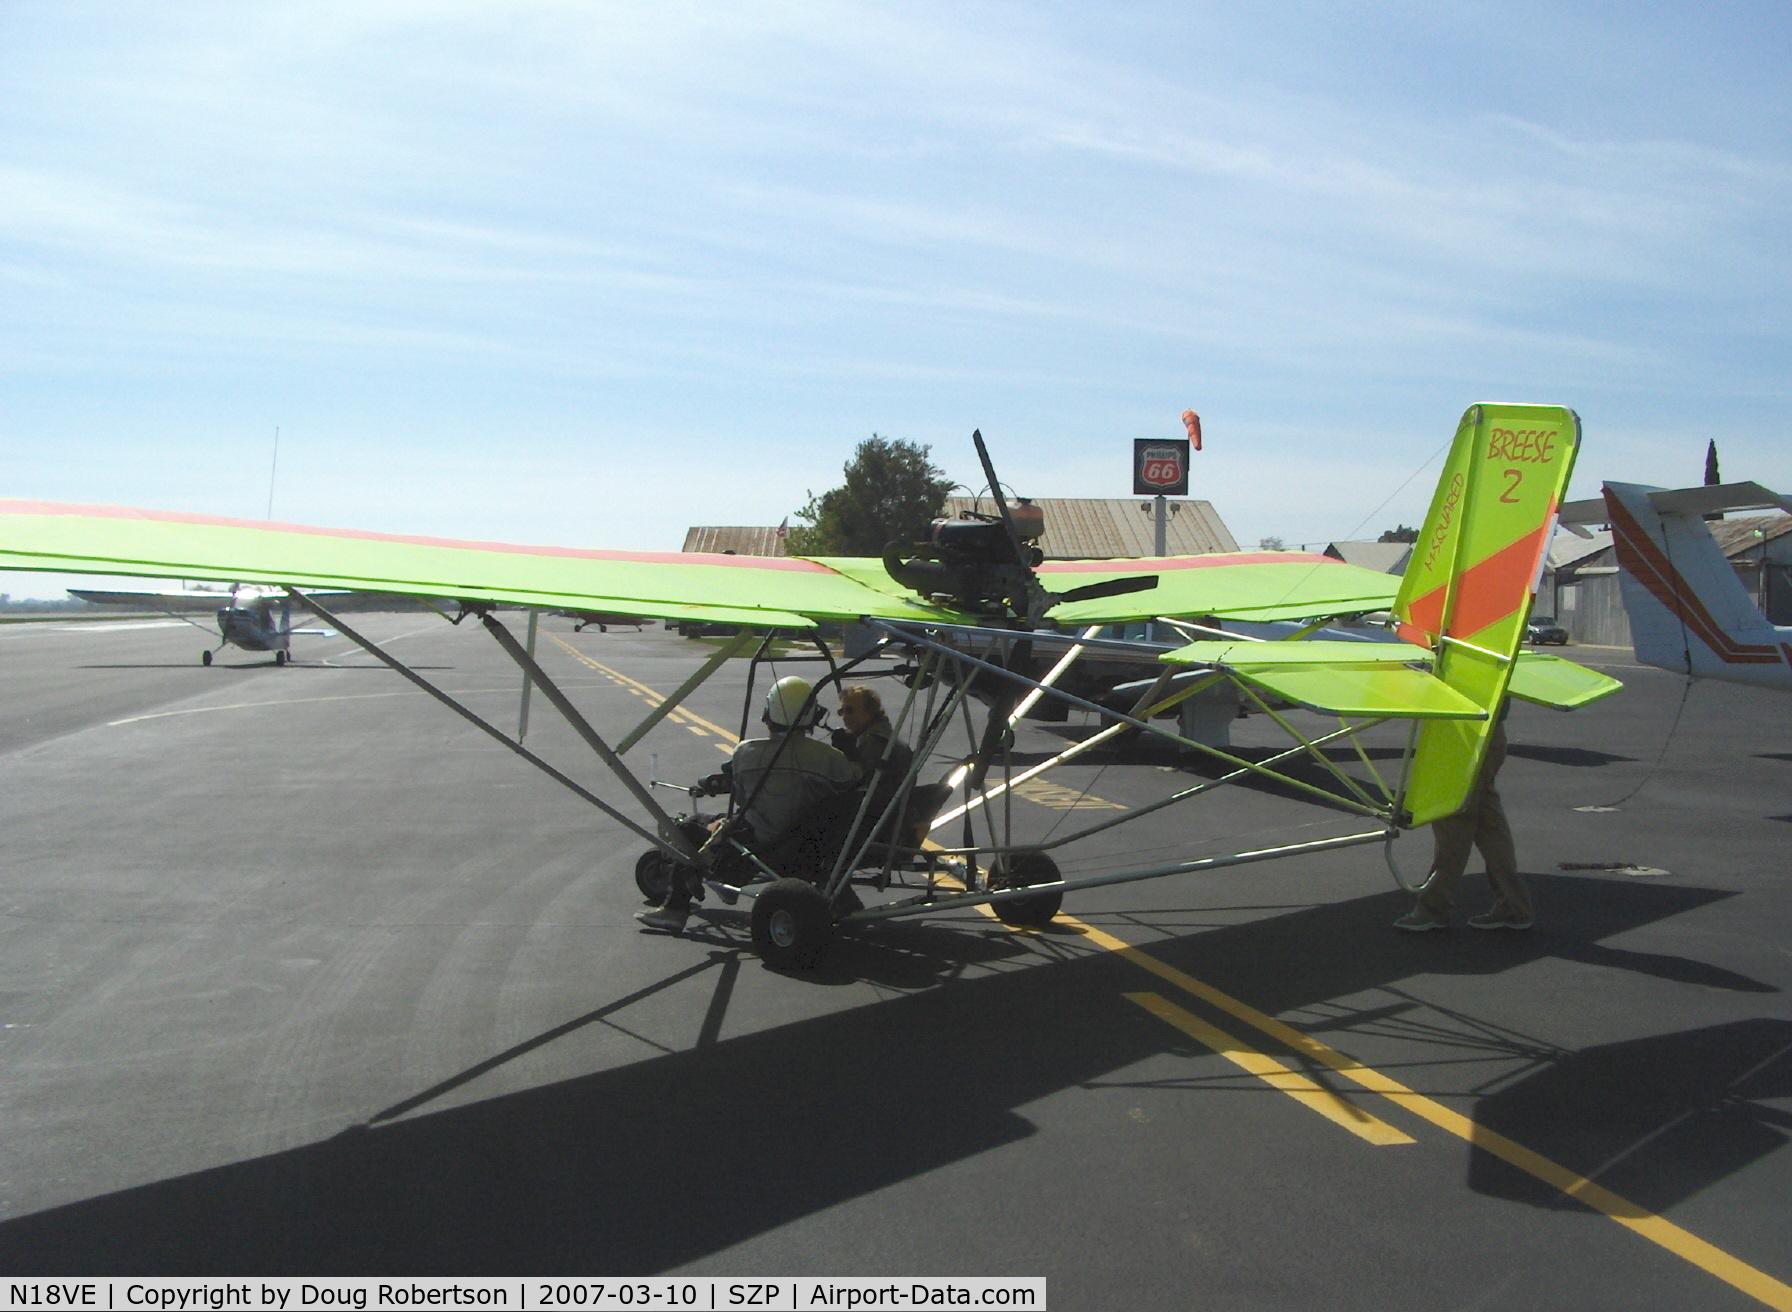 N18VE, 2003 M-Squared Breese 2 C/N 000550, M-Squared BREESE 2 Ultralight, Rotax 503 2 cylinder two-stroke 52 Hp